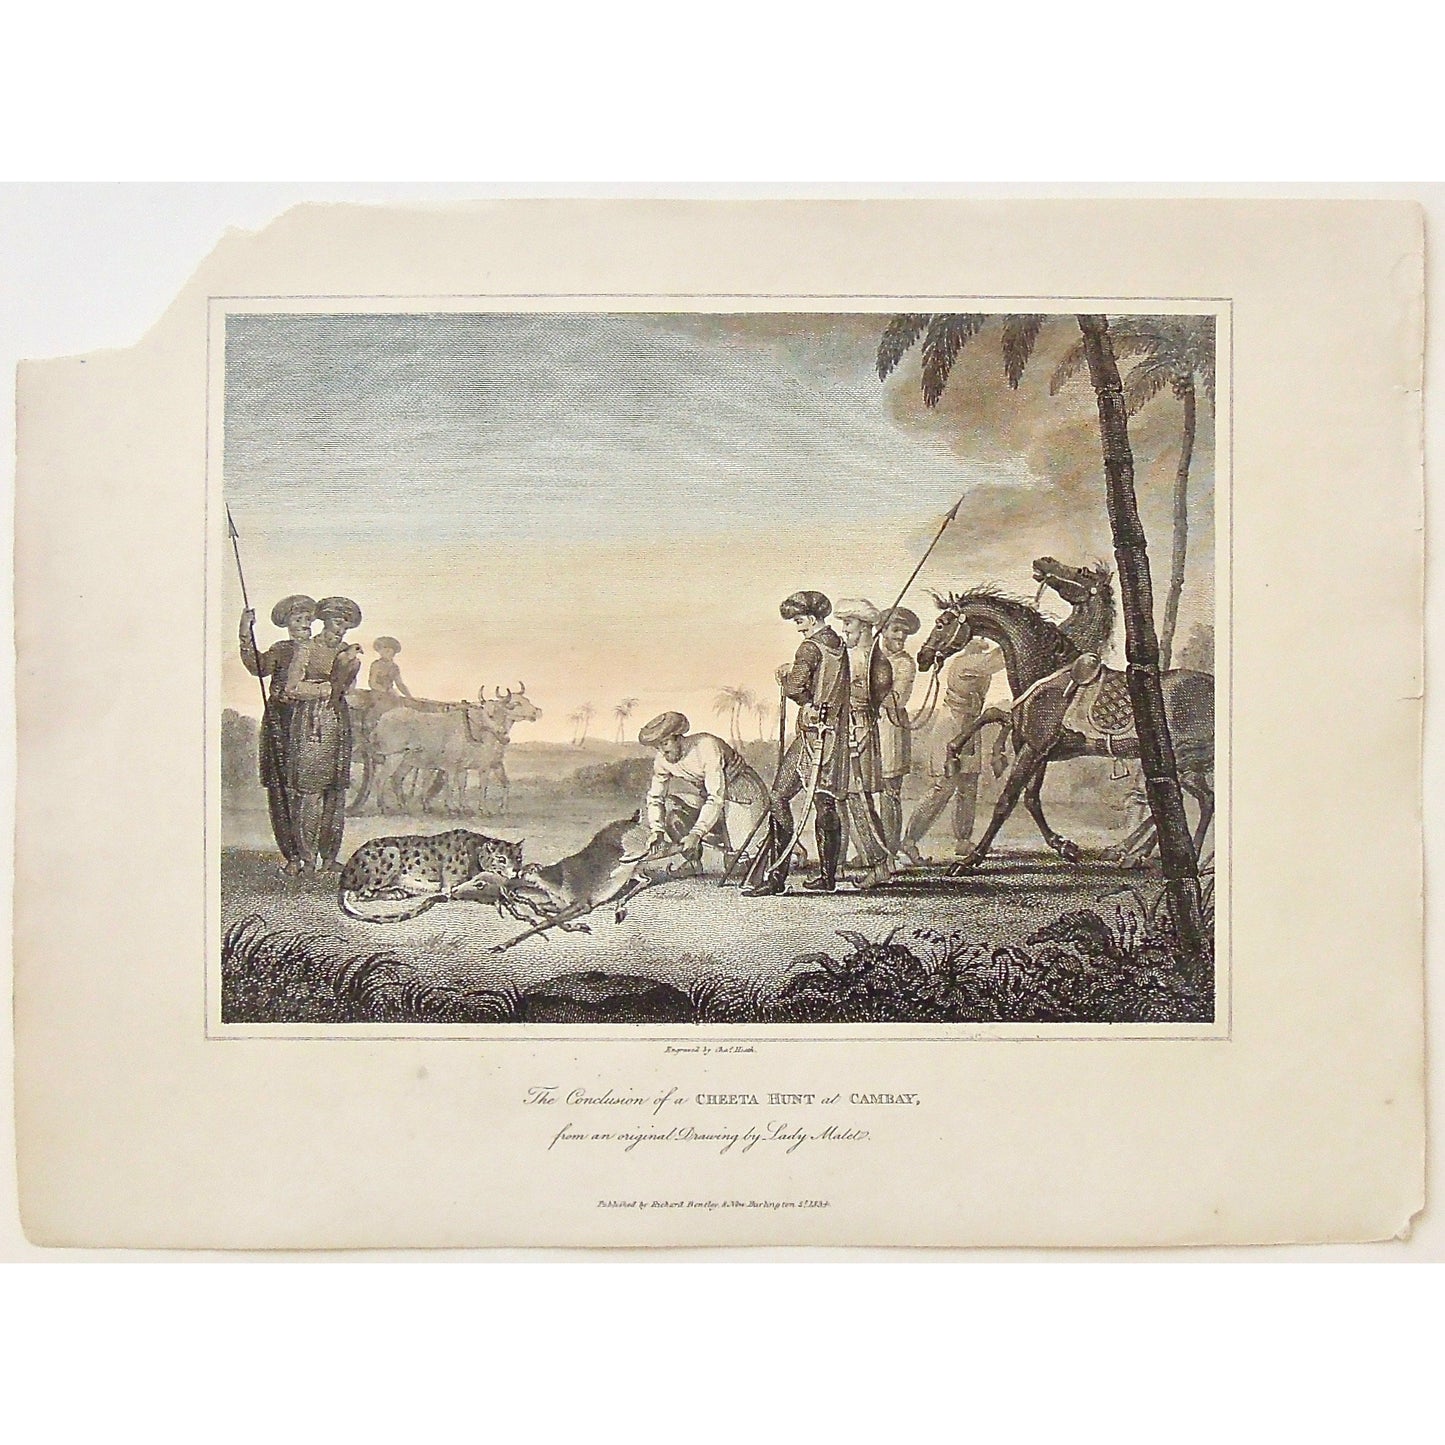 Conclusion of a Cheeta Hunt, Cheeta Hunt, Hunting, Cheeta, Cheetas, Cambay, Hunters, Indian, India, Spears, Spearing, Dear, Ox, Bulls, Horse, Swords, Headgear, Head dress, Falcon, Lady Malet, James Forbes, Forbes, Eliza Rosée, Countess De Montalembert, Oriental Memoirs, Narrative of Seventeen Years Residence in India, Bentley, 8 New Burlington Street, London, Heath, Nichols & Son, 25 Parliament Street, 1834, Steel engraving, Antique Print, Antique, Prints, Vintage Prints, Vintage, Collector, Collectable, 